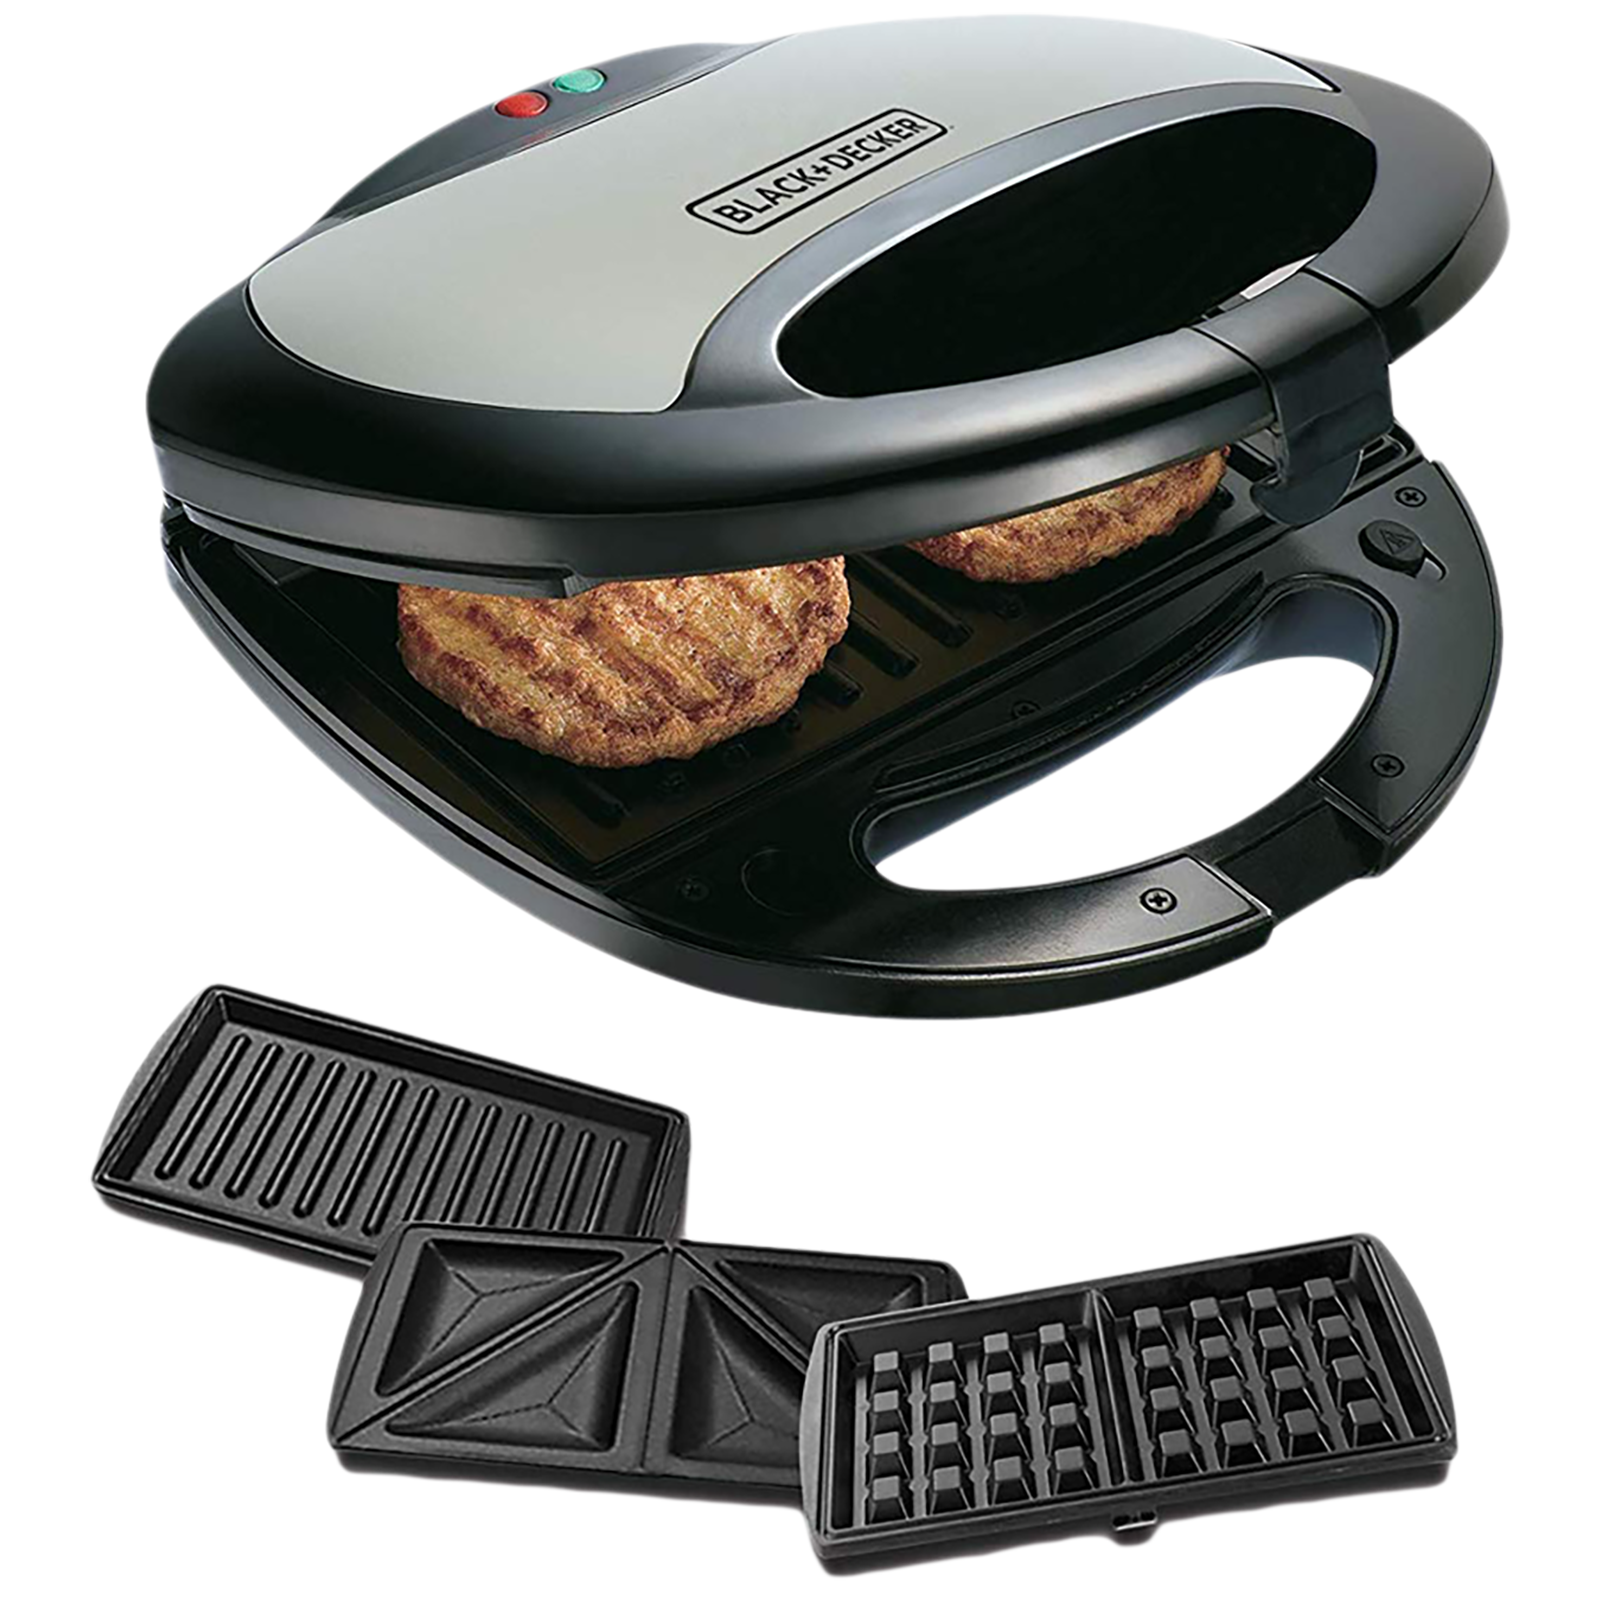 Black And Decker TS2080 220 Volt 2-Slice Sandwich Maker And Grill For Export